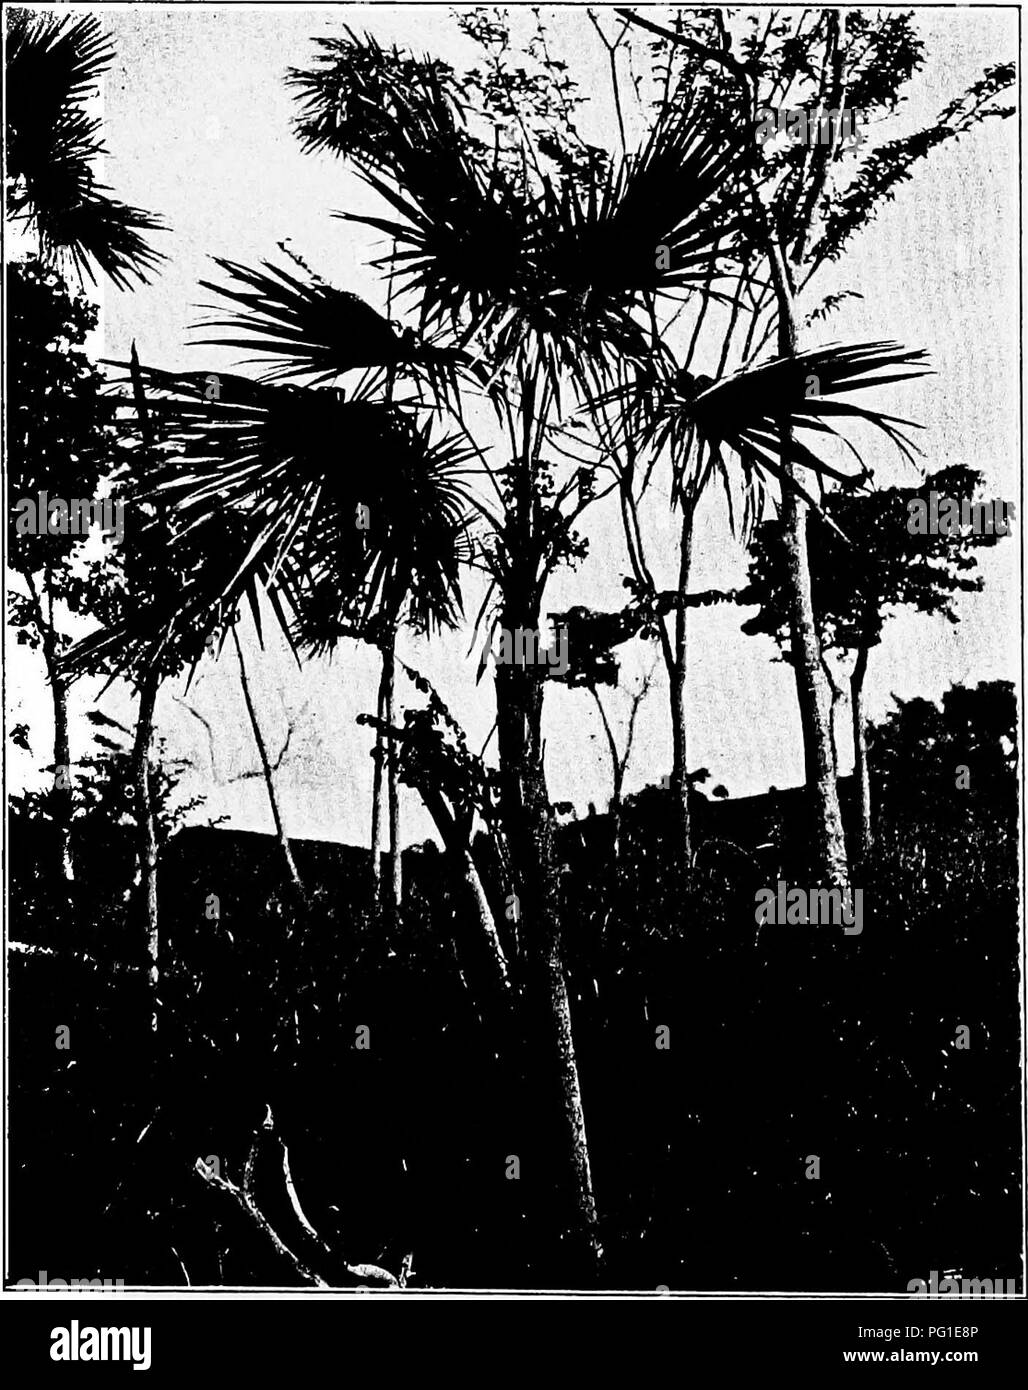 . North American trees : being descriptions and illustrations of the trees growing independently of cultivation in North America, north of Mexico and the West Indies . Trees. Silver Thatch Palm ^35 yond the middle into numerous narrowly lanceolate acuminate segments; they are yellow-green and shining on the upper side, silvery-white beneath, at least when young; their stalks are slender and about as long as the blades, expanded below into fibrous sheaths which remain attached to the trunk after the leaves have fallen away; the large panicles of flowers are short-stalked and borne among the lea Stock Photo